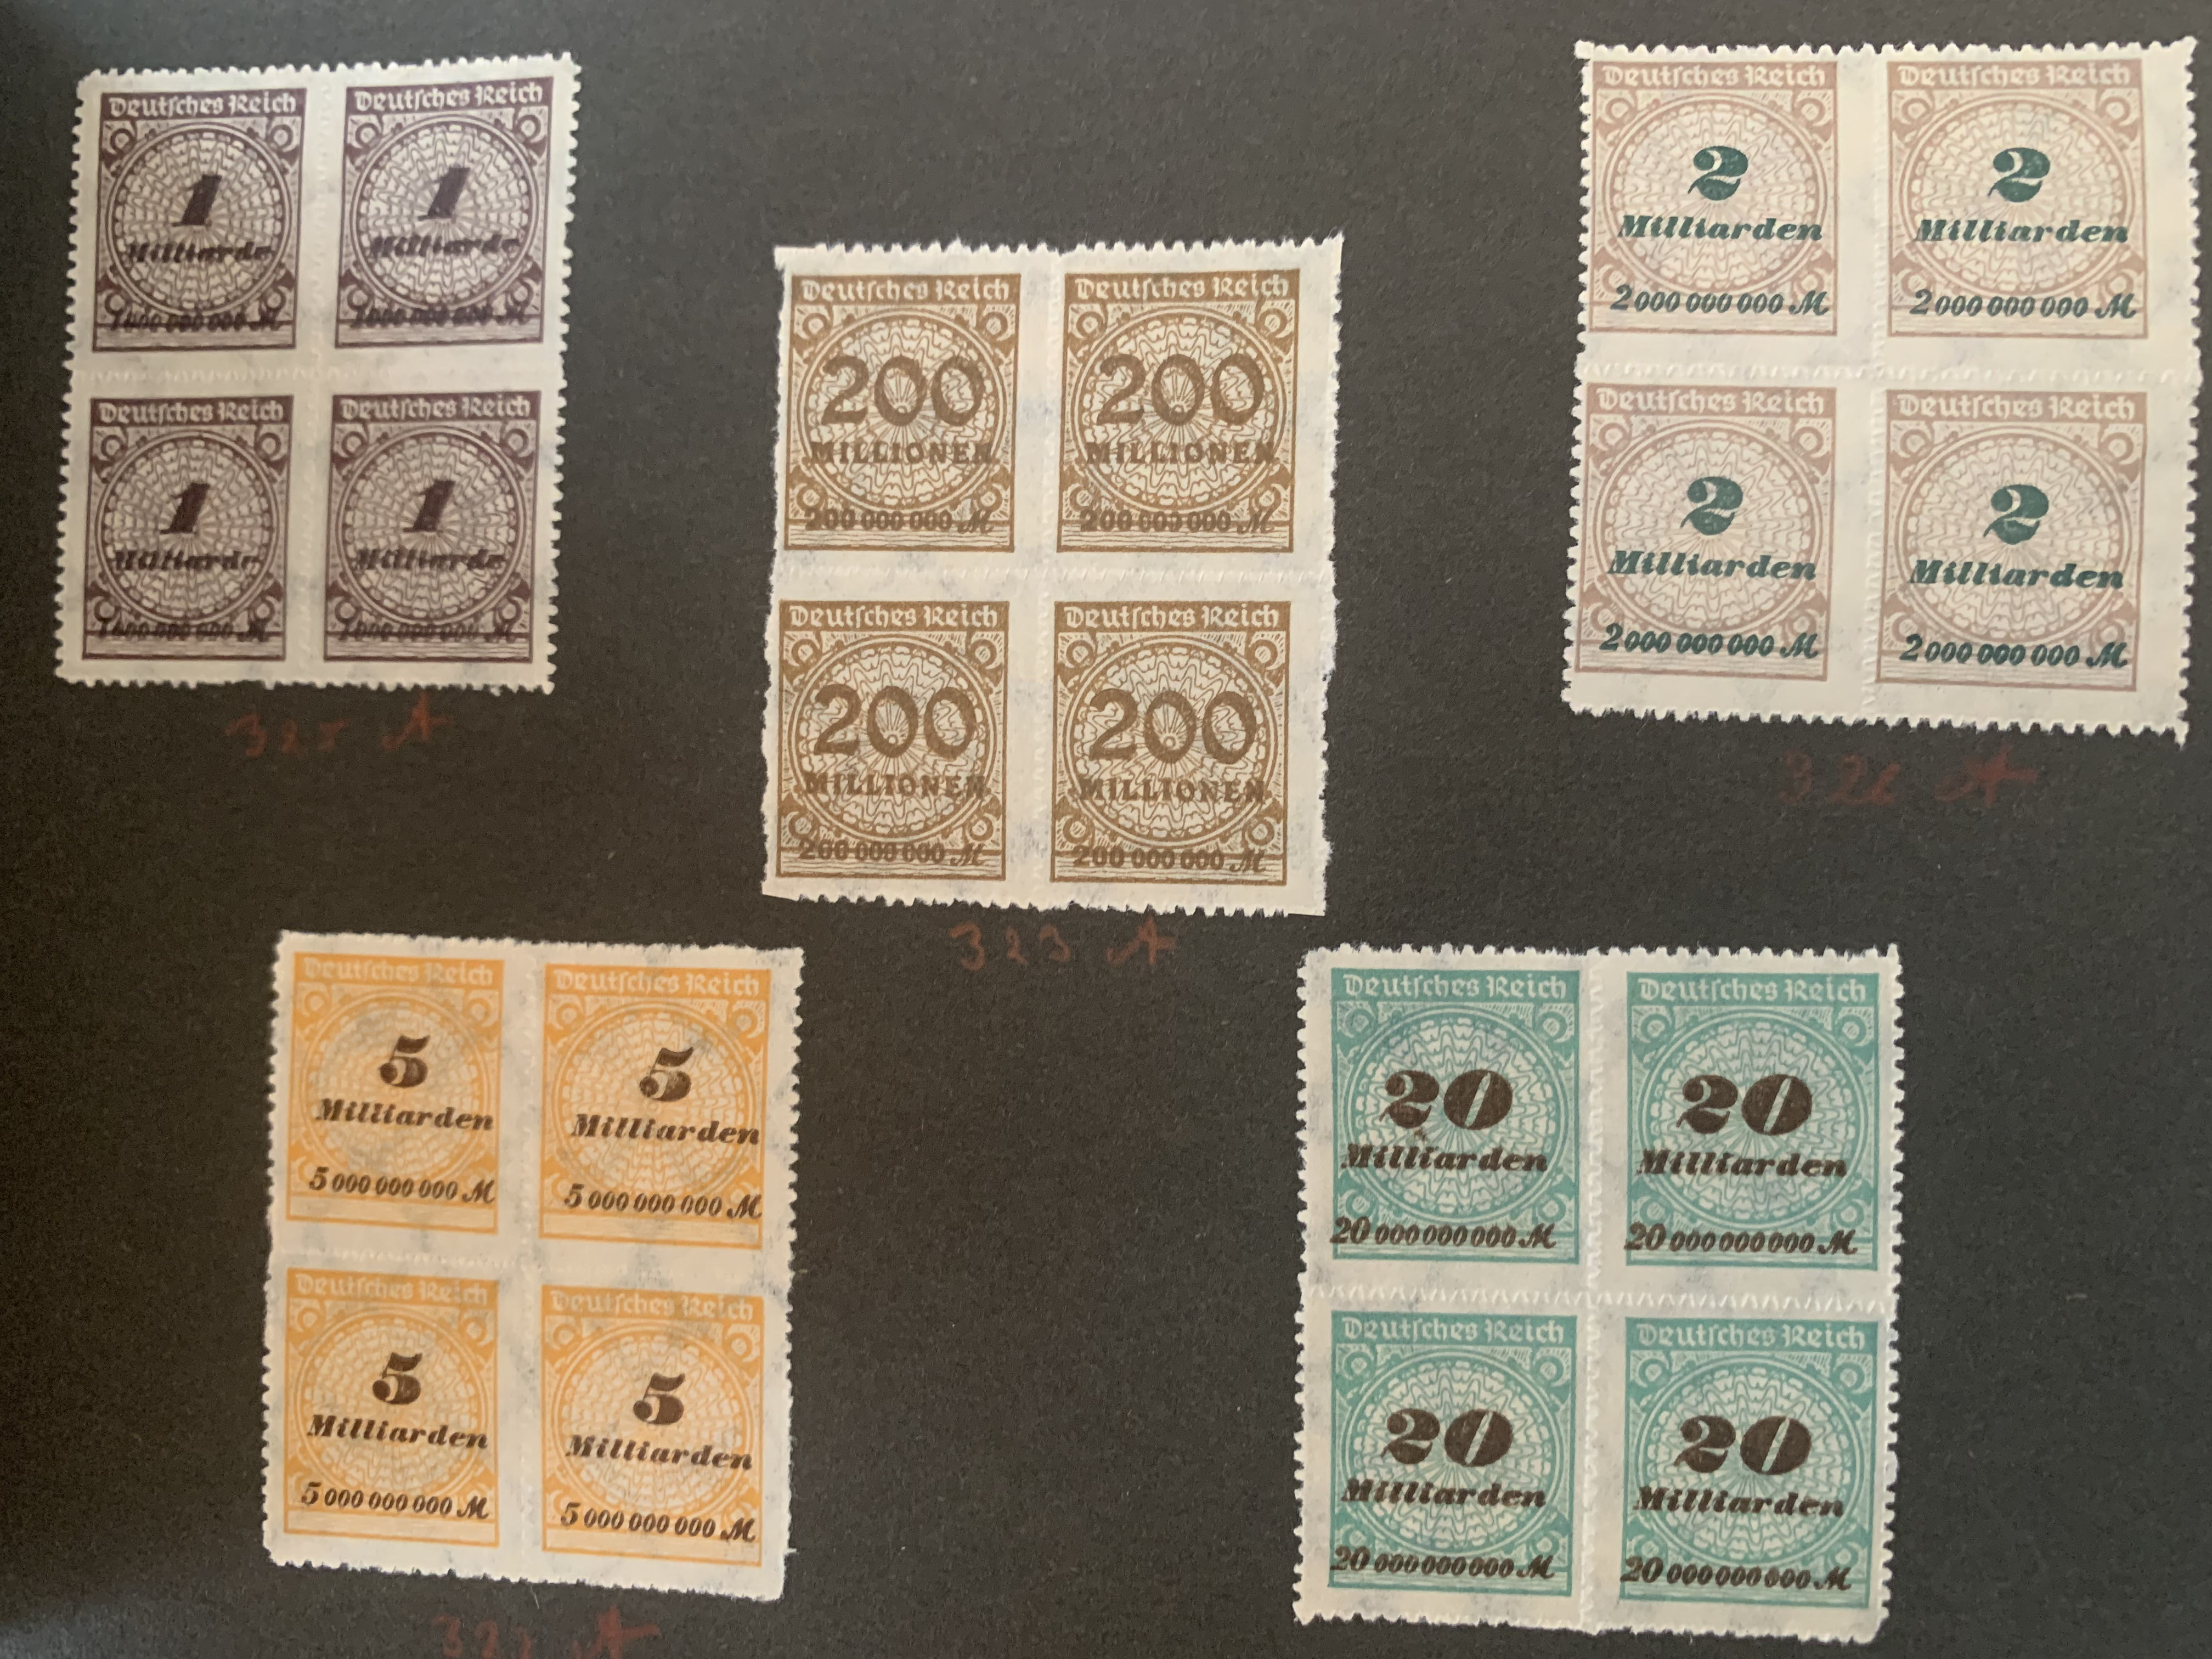 Milliarden stamps during German hyperinflation